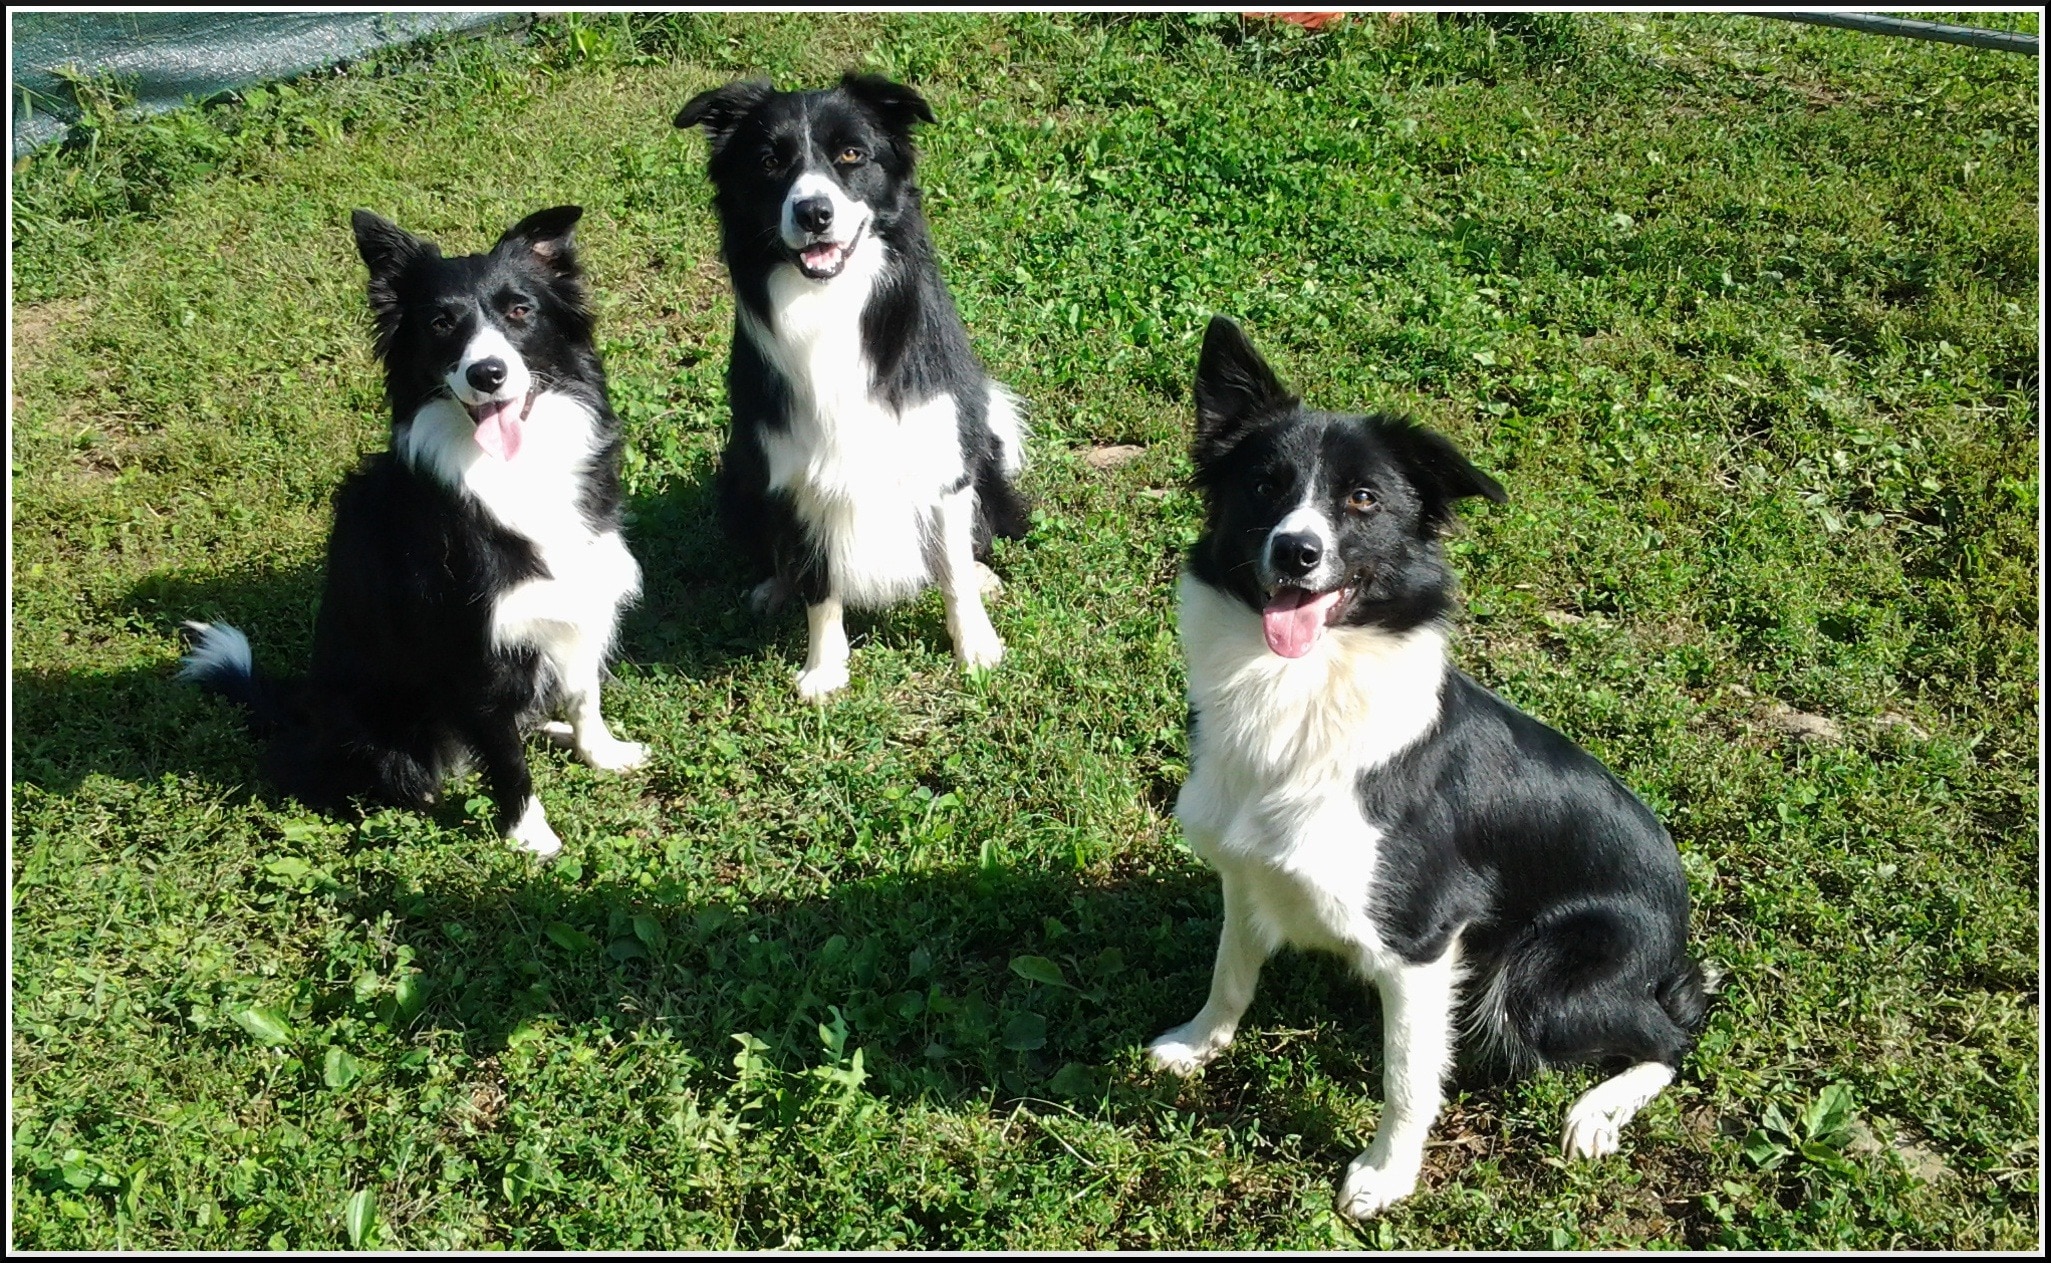 three black-and-white Border Collies sitting in the grass ground field during daytime